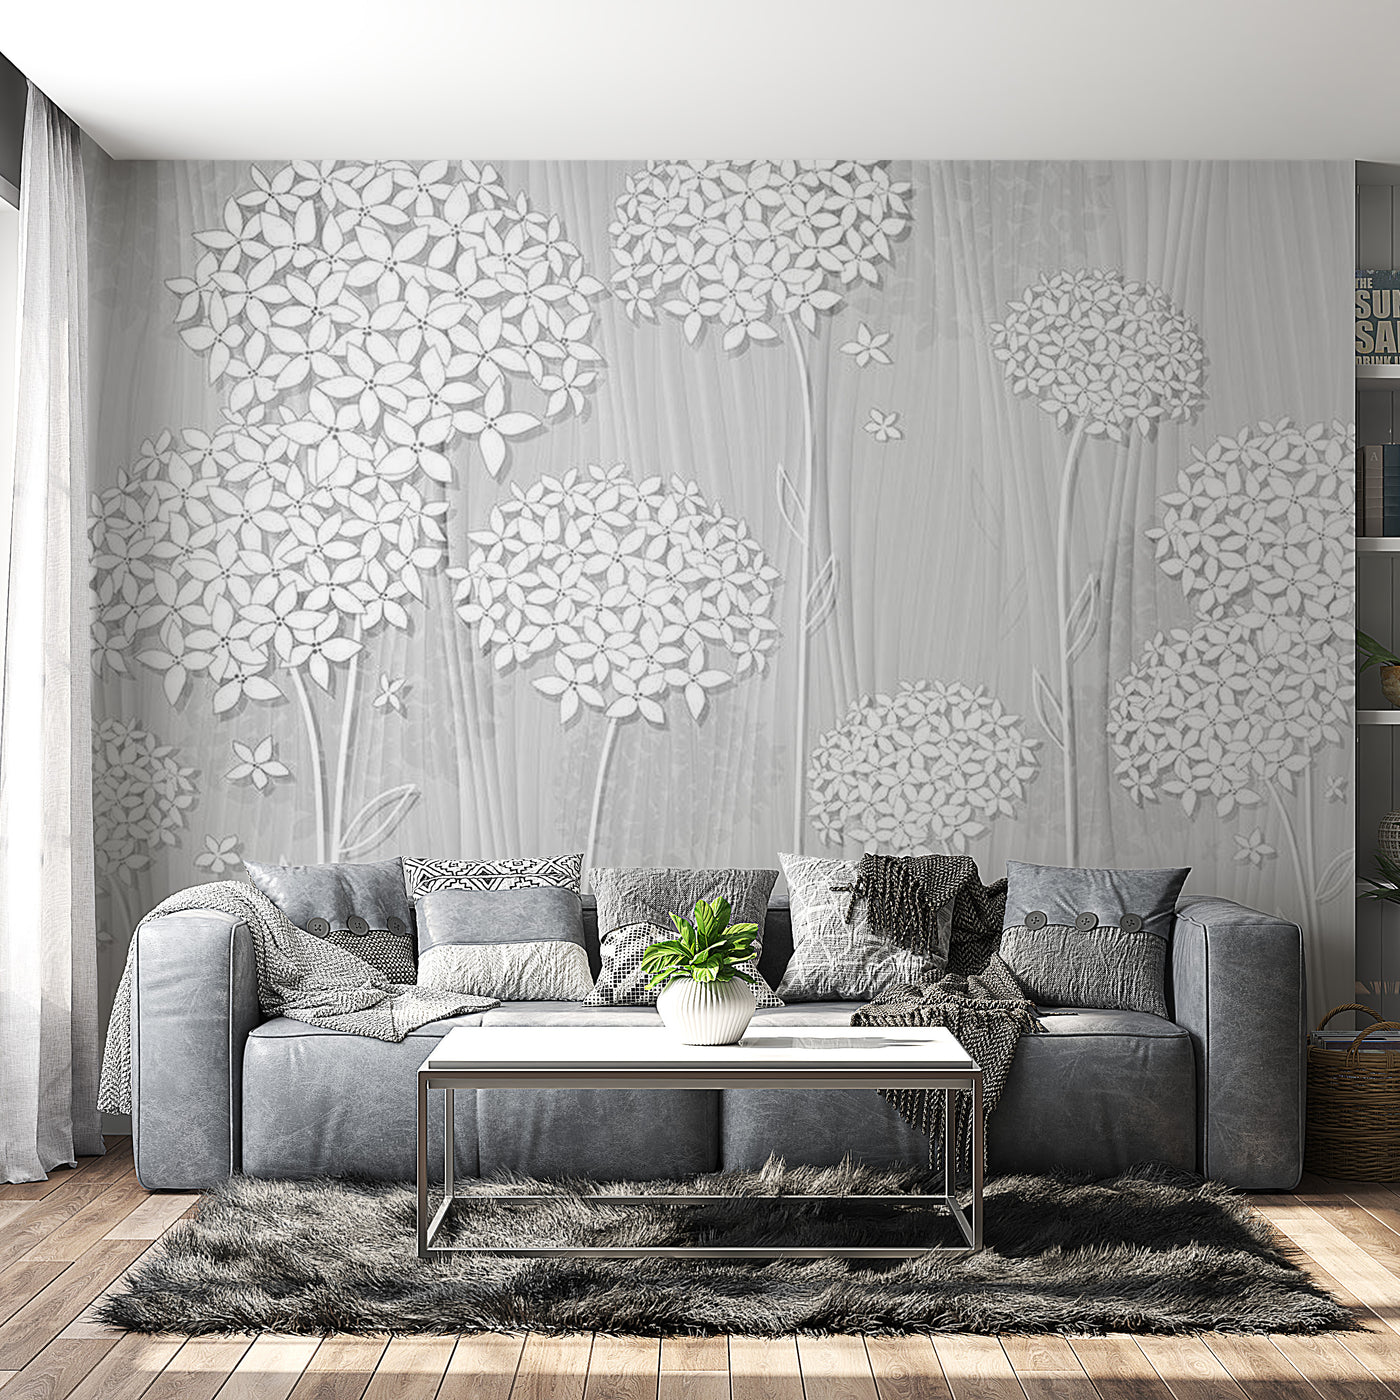 Peel & Stick Floral Wall Mural - White Flower Fantasie - Removable Wall Decals